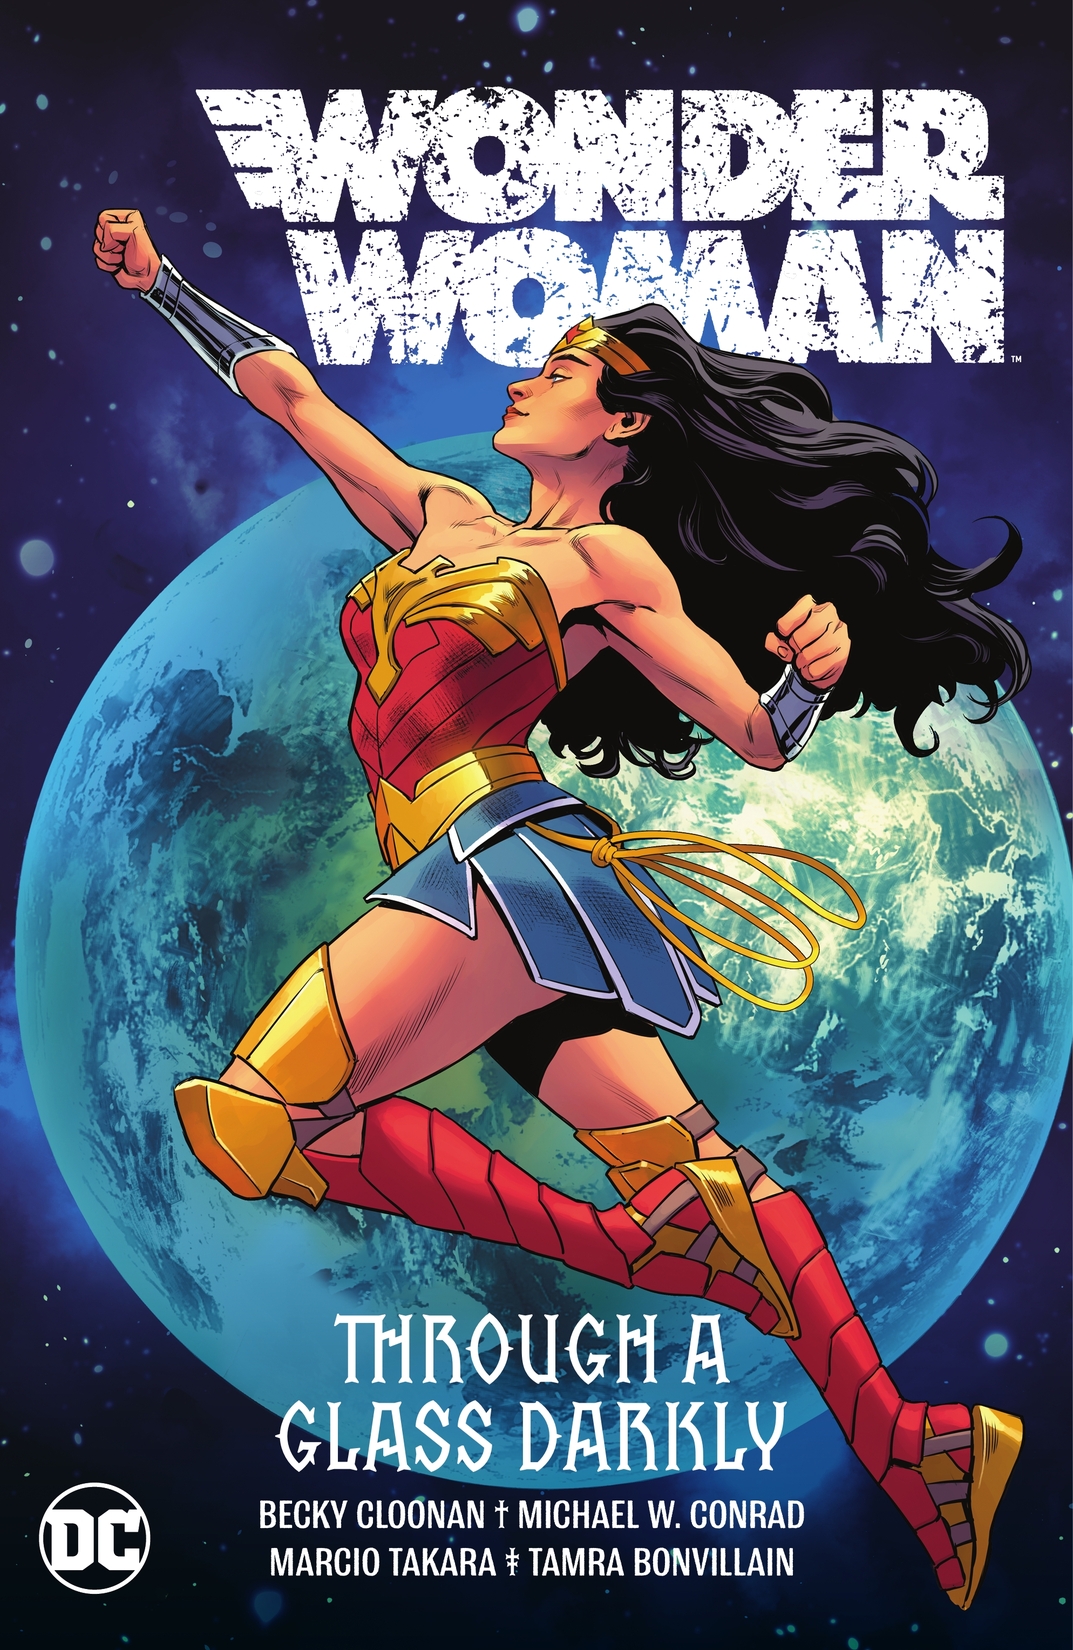 Wonder Woman Vol. 2: Through A Glass Darkly preview images